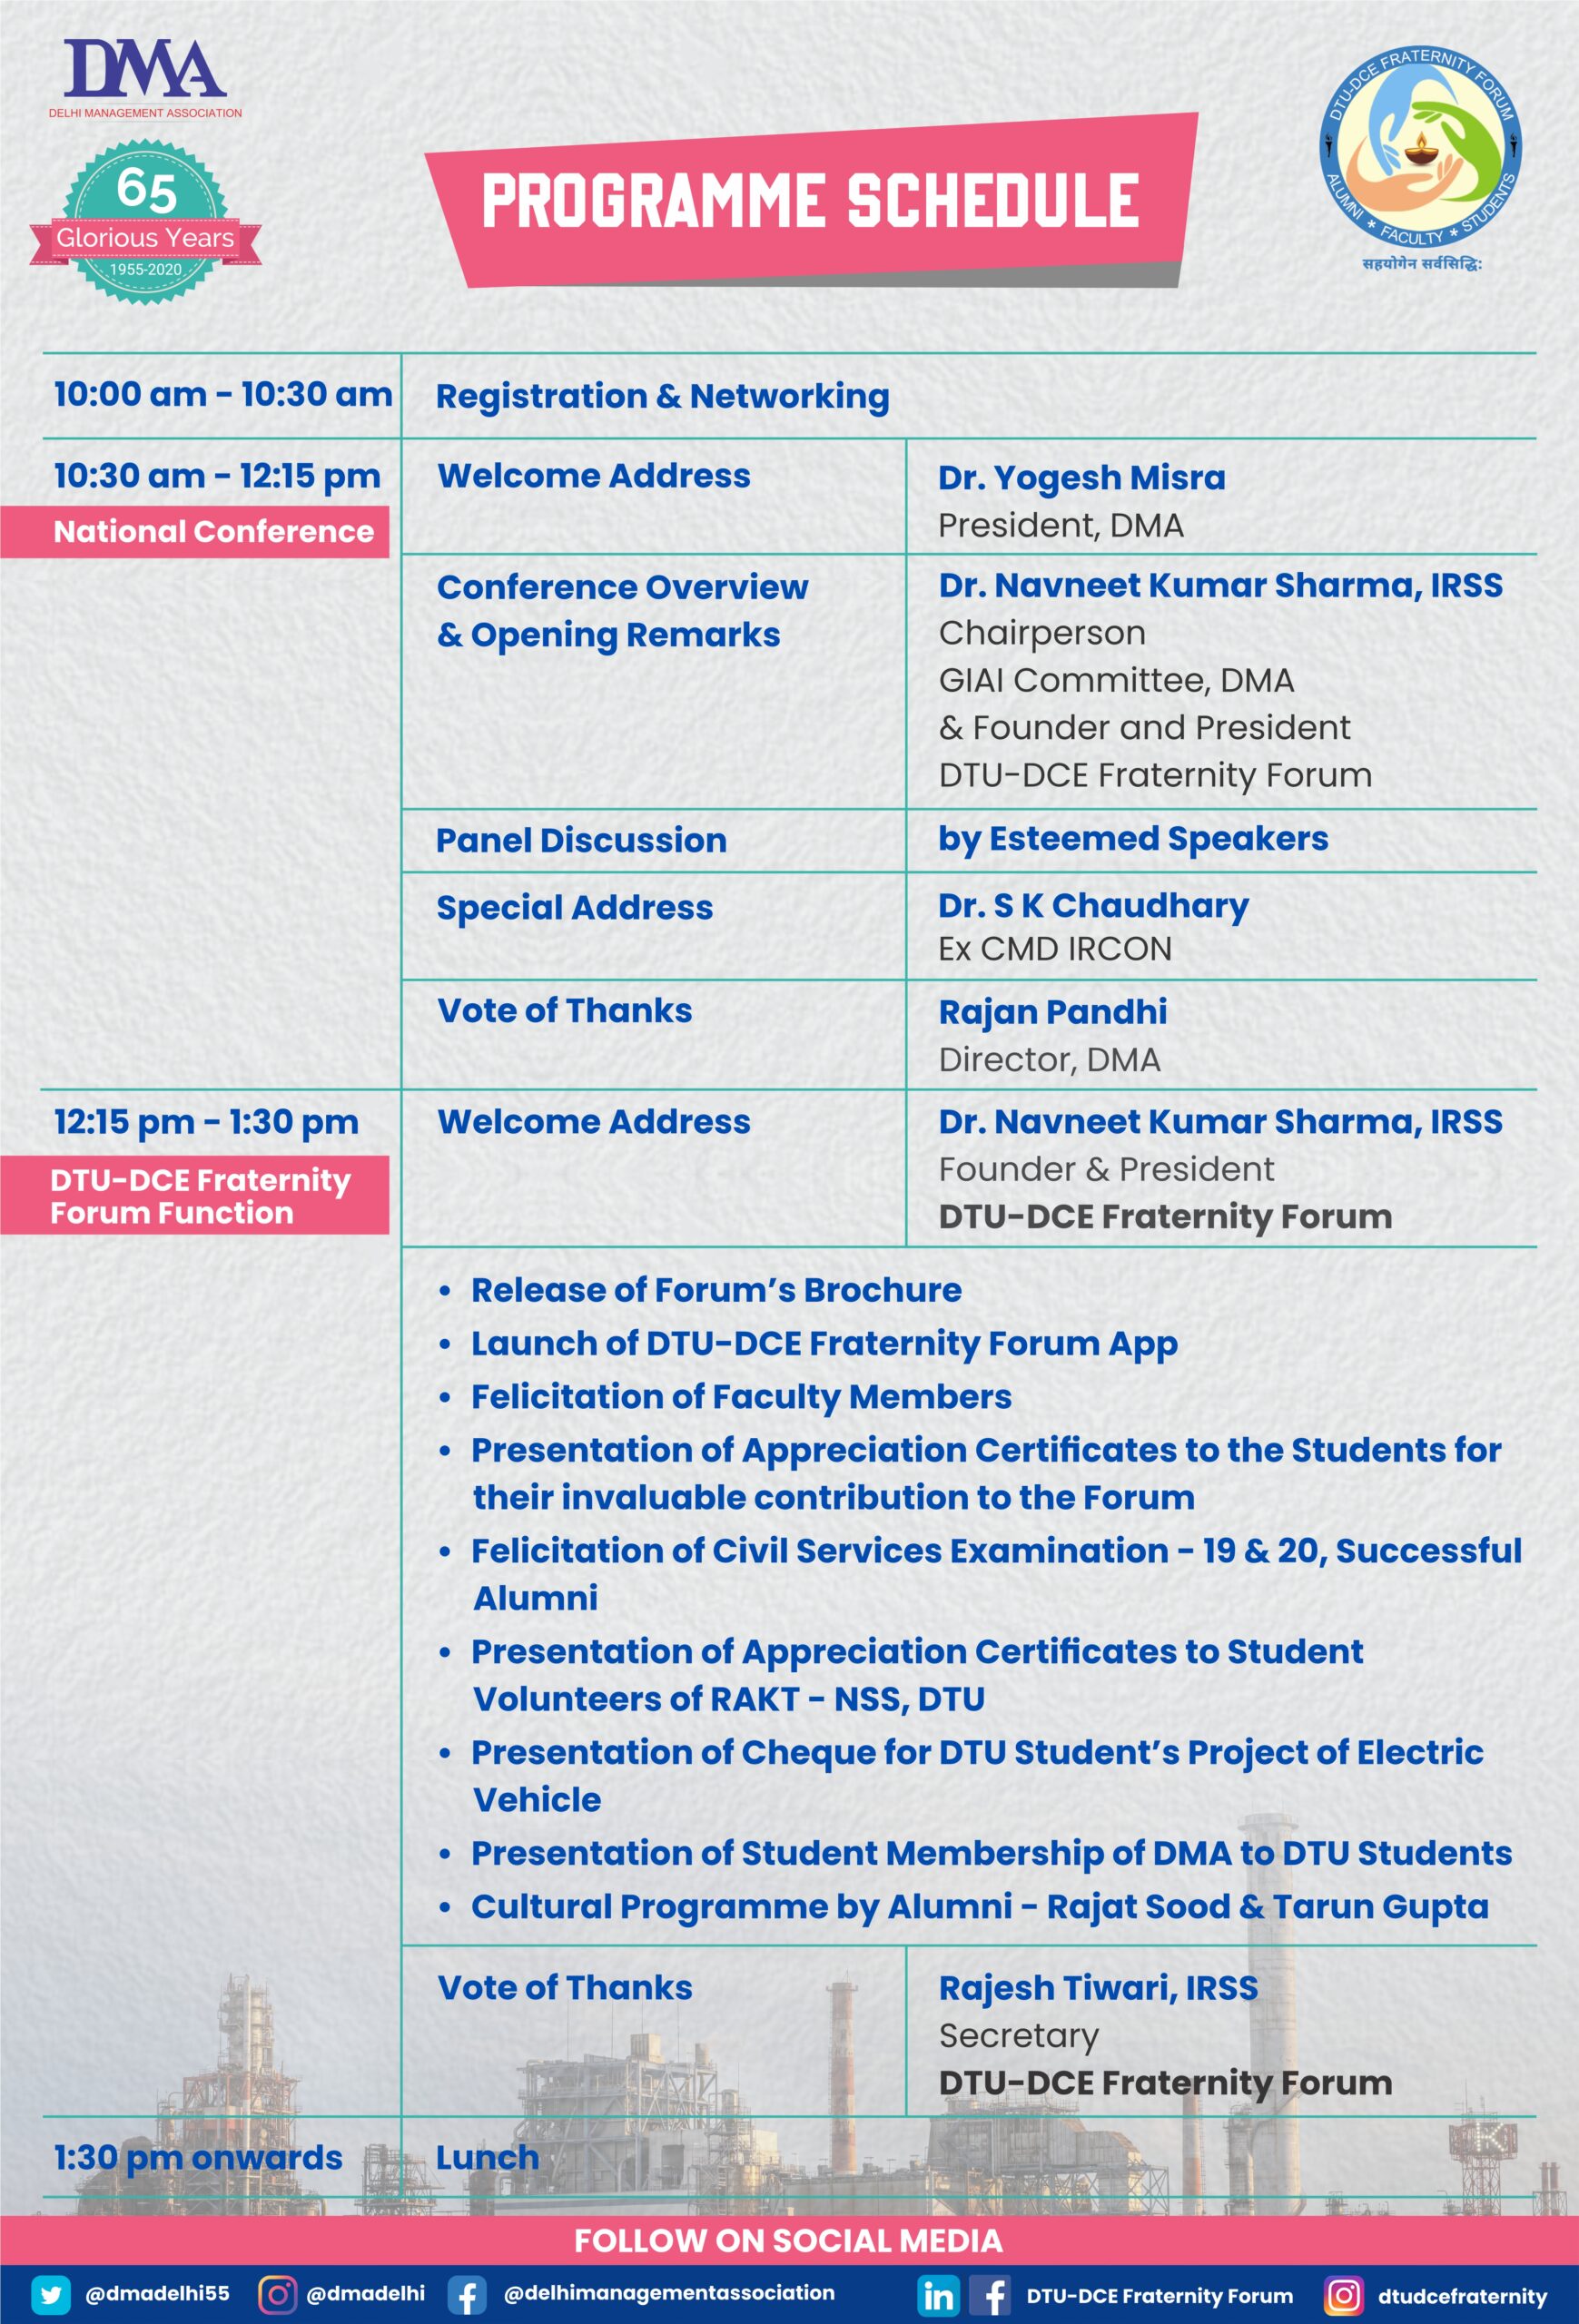 National Conference on “Atmnirbhar Bharat: Industry 4.0